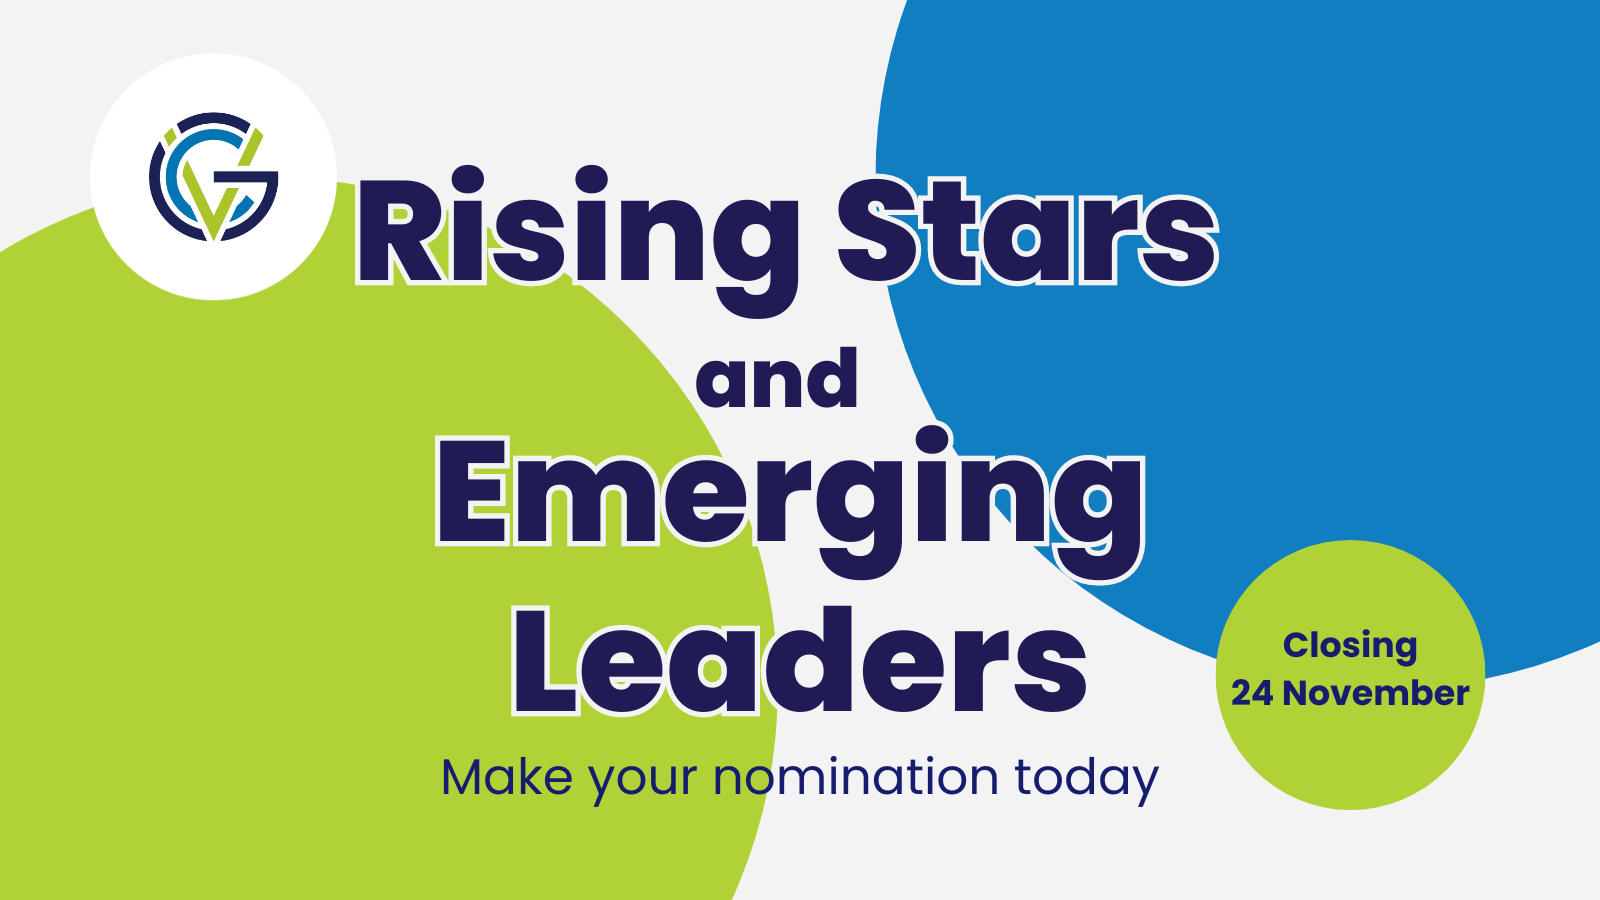 Nominations are open for Rising Stars and Emerging Leaders